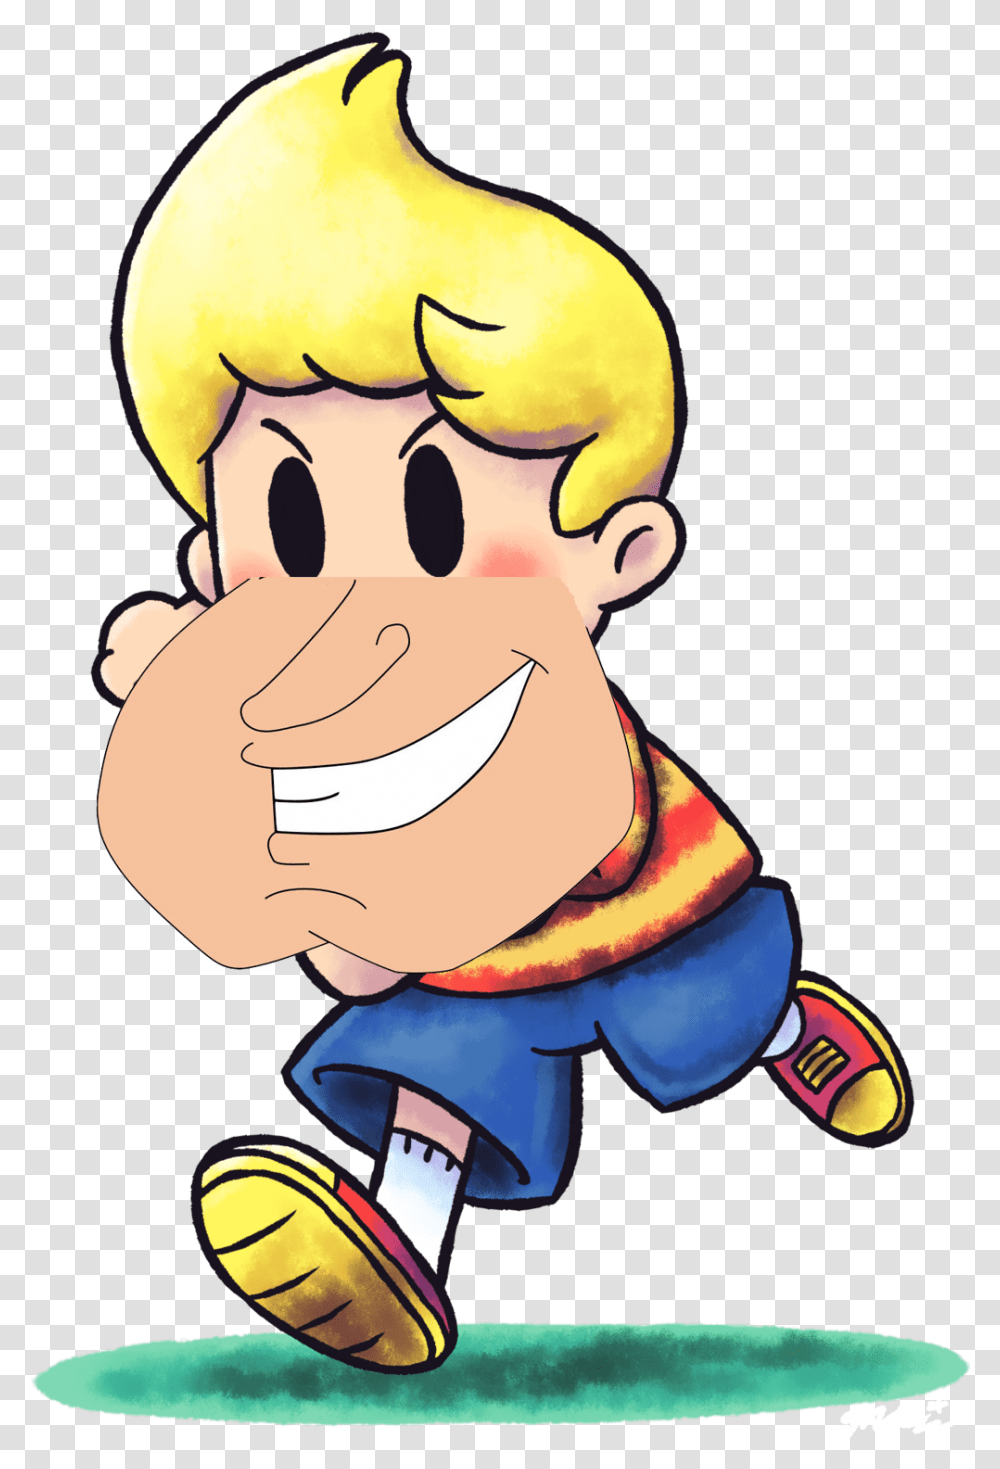 Pin Hatebubbles On Quagmire Chin Awful Characters Mother 3 Lucas, Food, Head Transparent Png